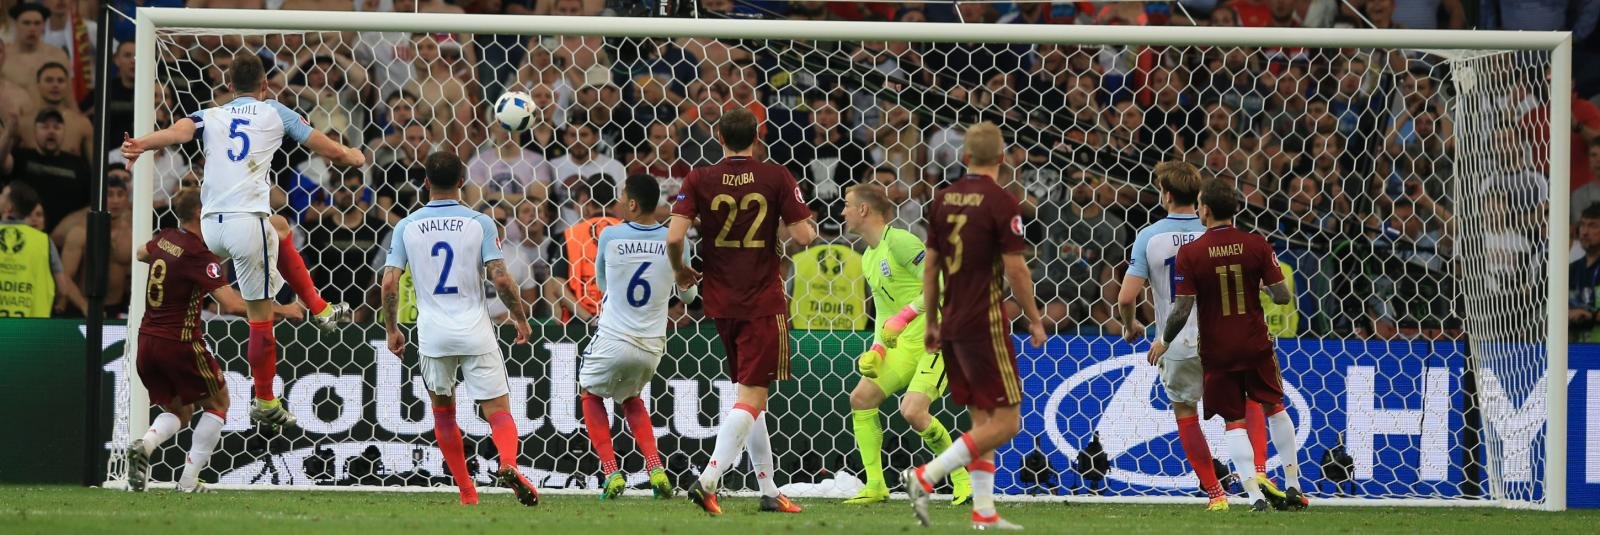 England 1-1 Russia: EURO 2016 Group B Report